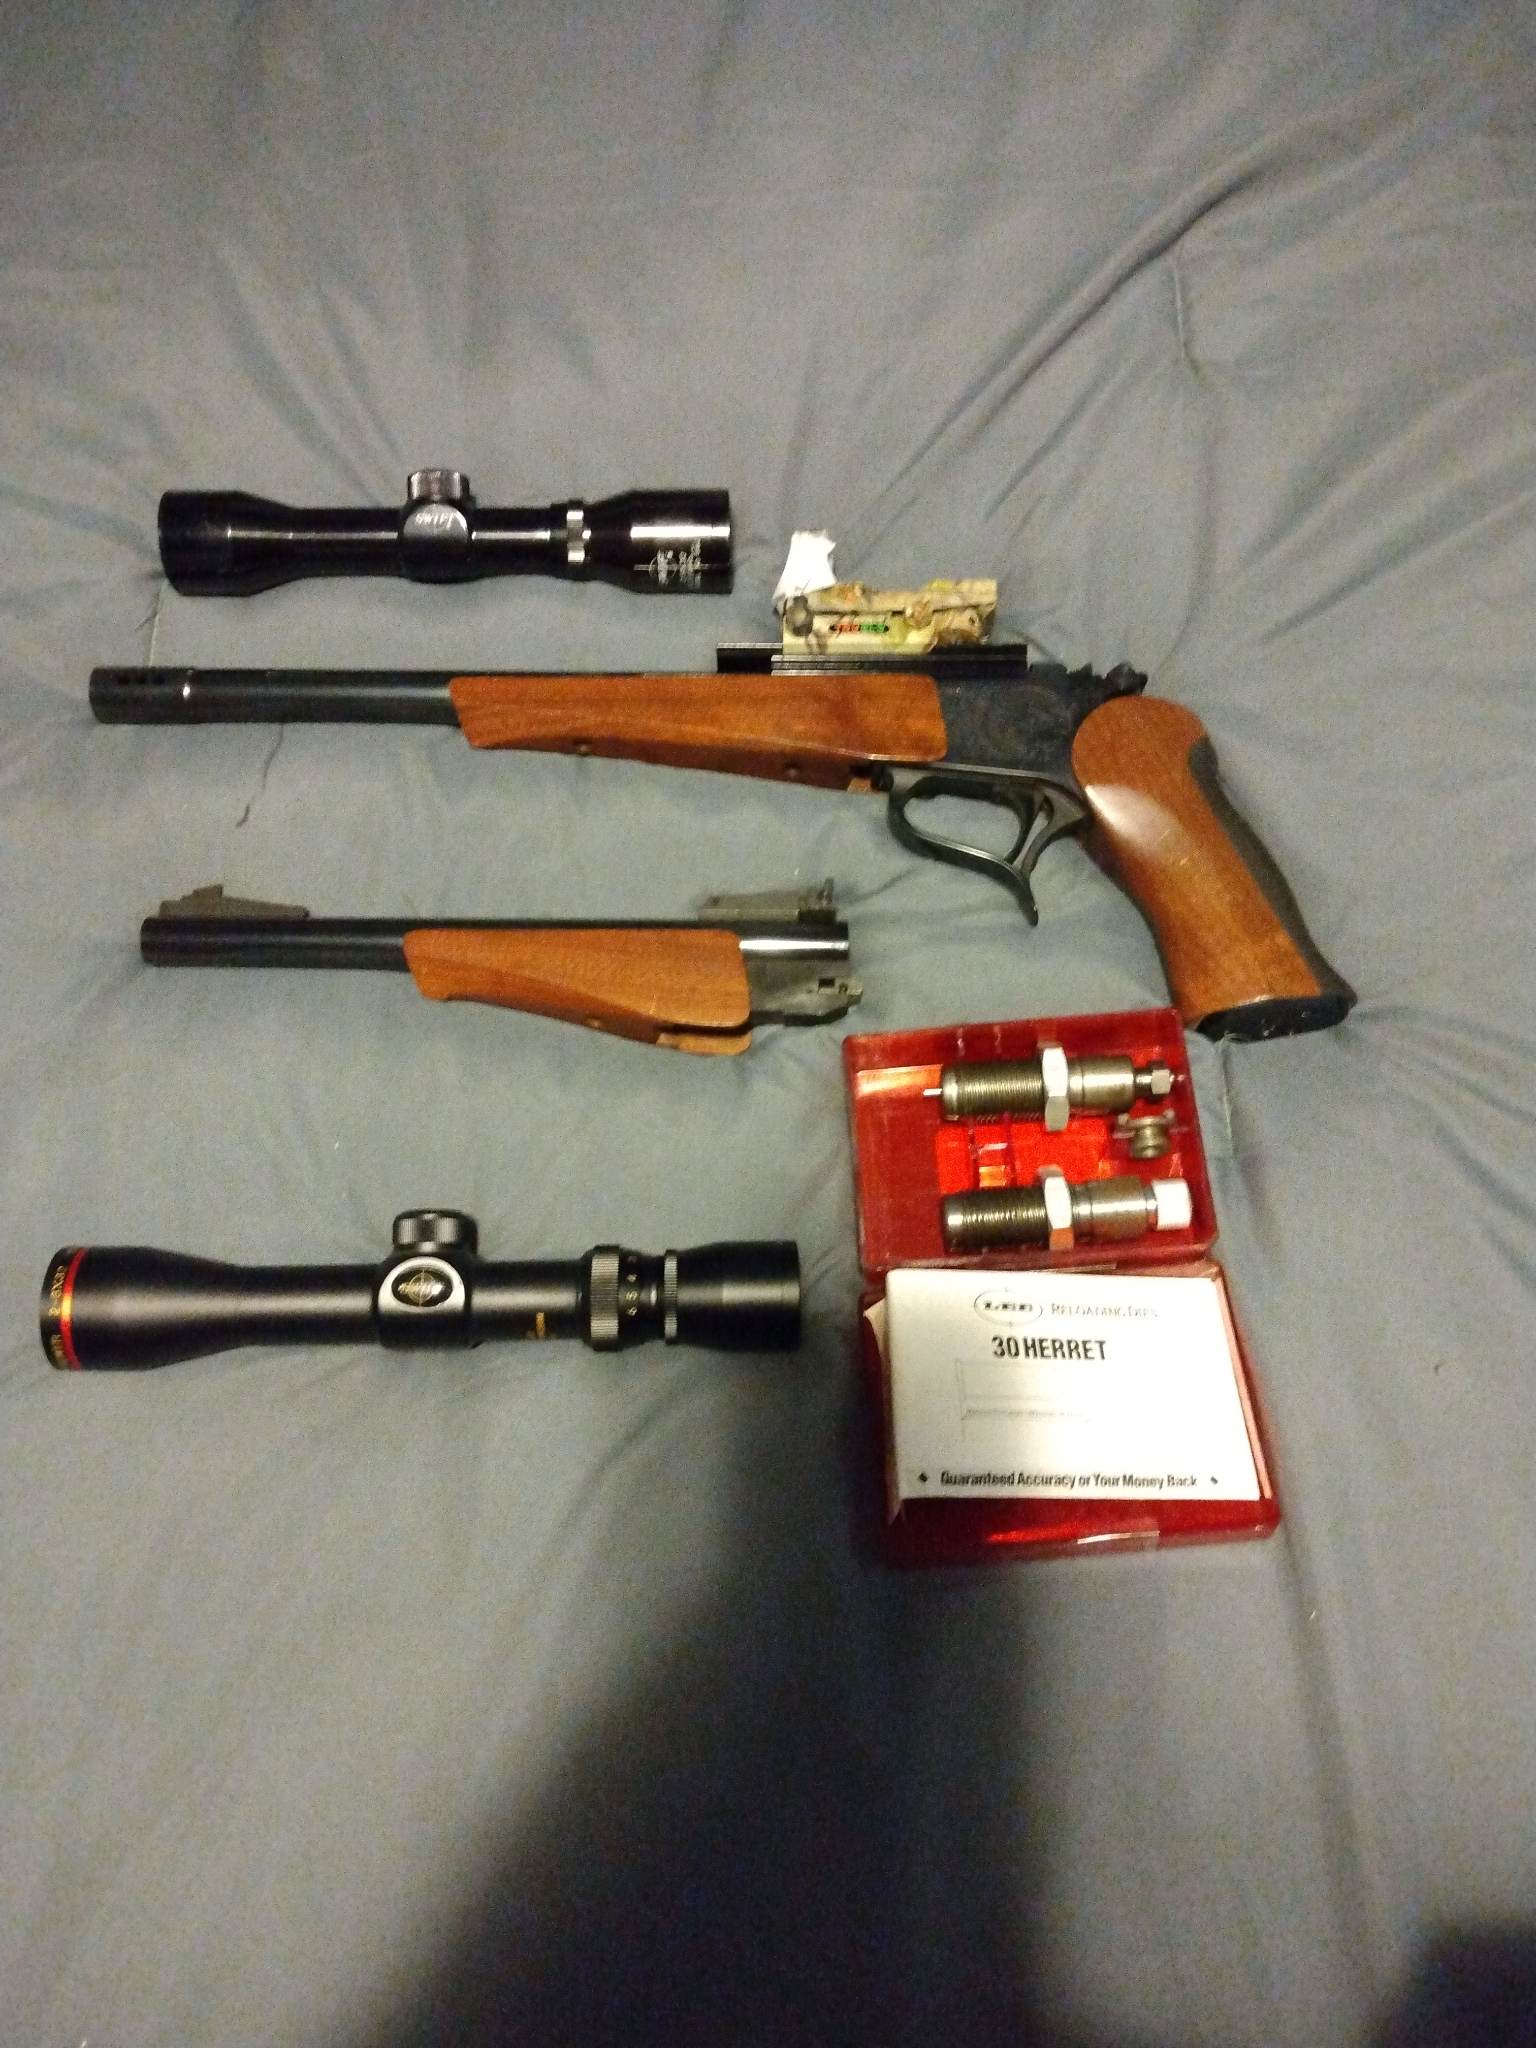 First black powder Rifle will not fire and I'm not sure why. : r/blackpowder